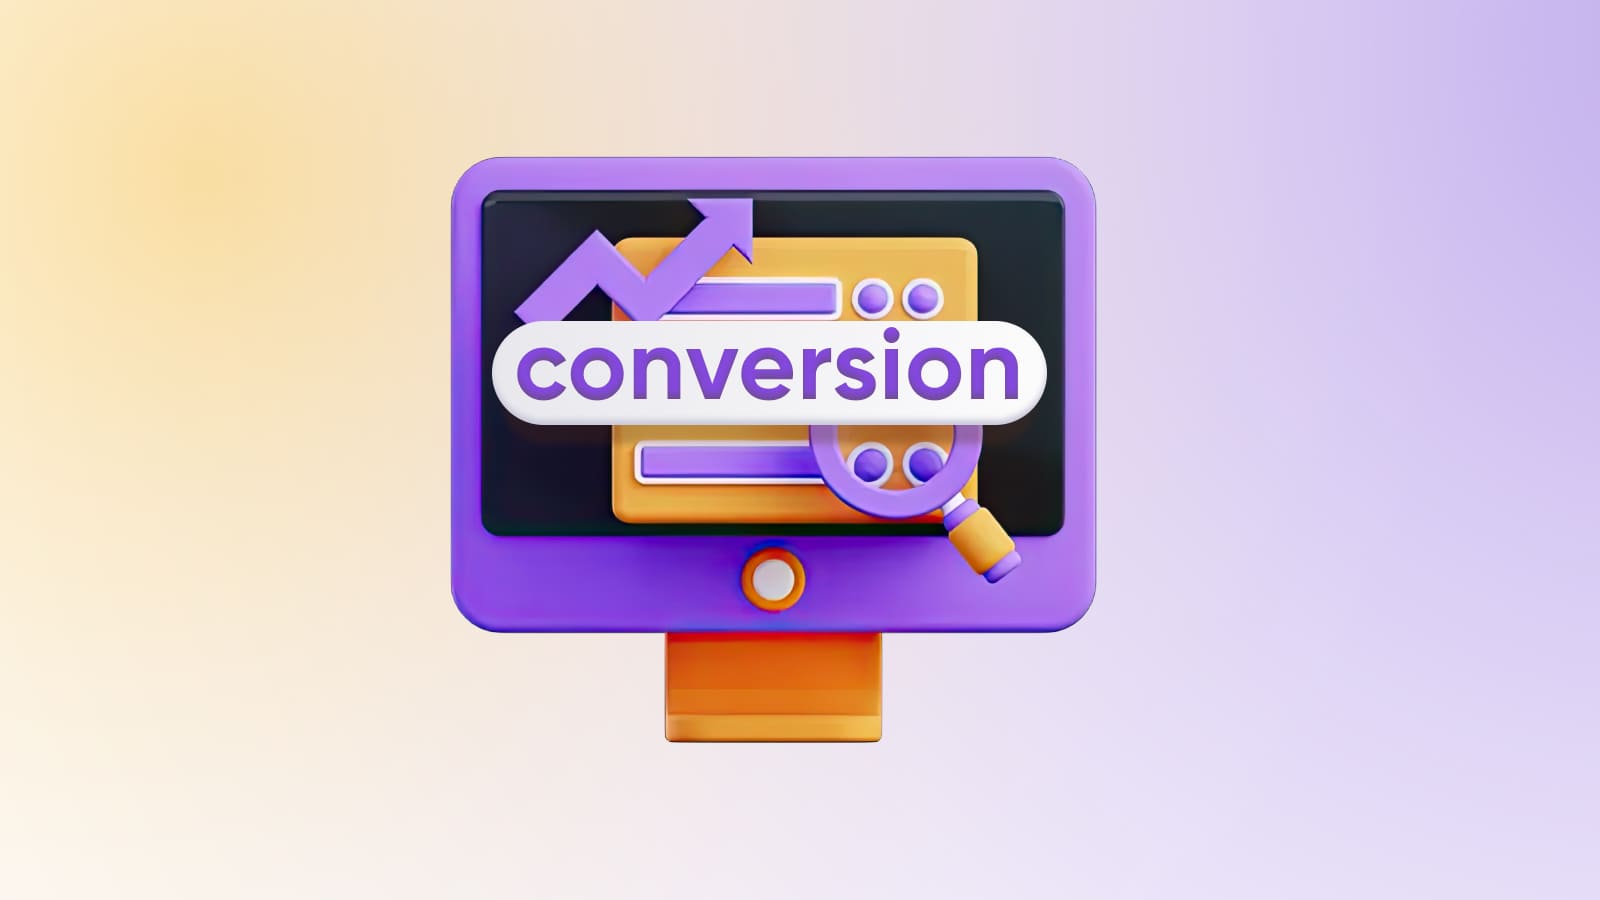 Payment conversion is the ratio of completed payments to total transactions.